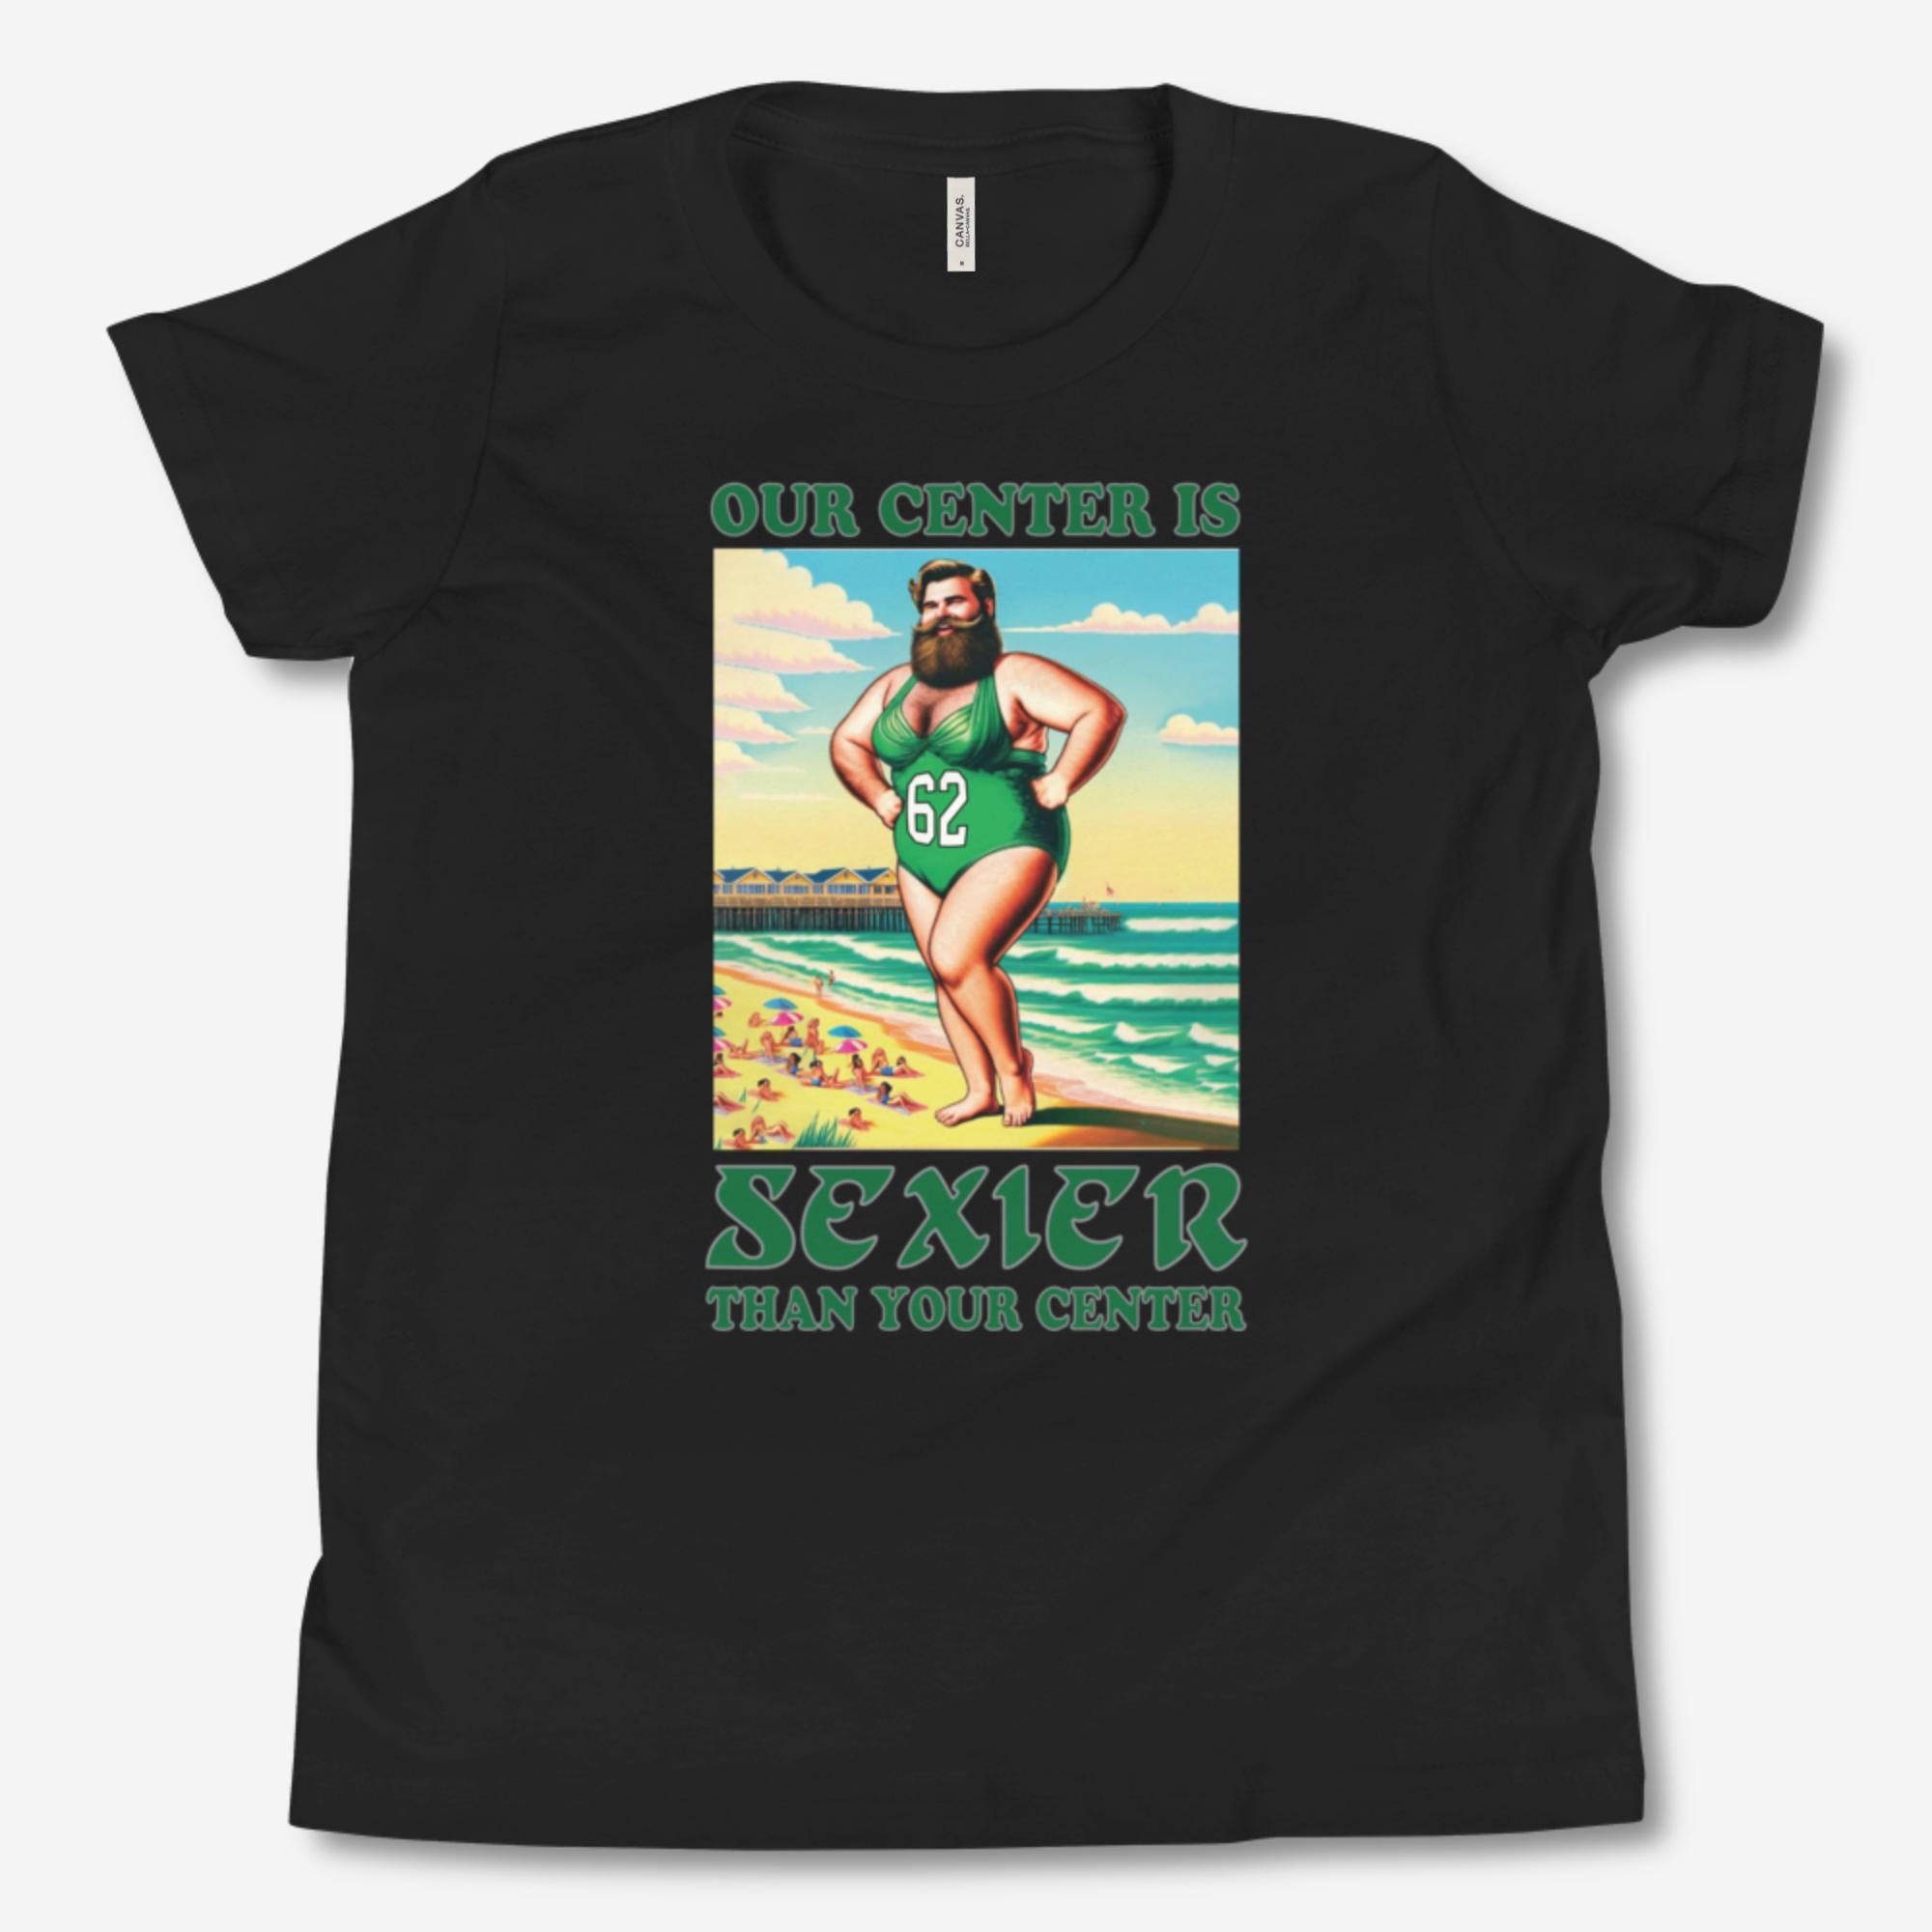 "Our Center Is Sexier Than Your Center" Youth Tee